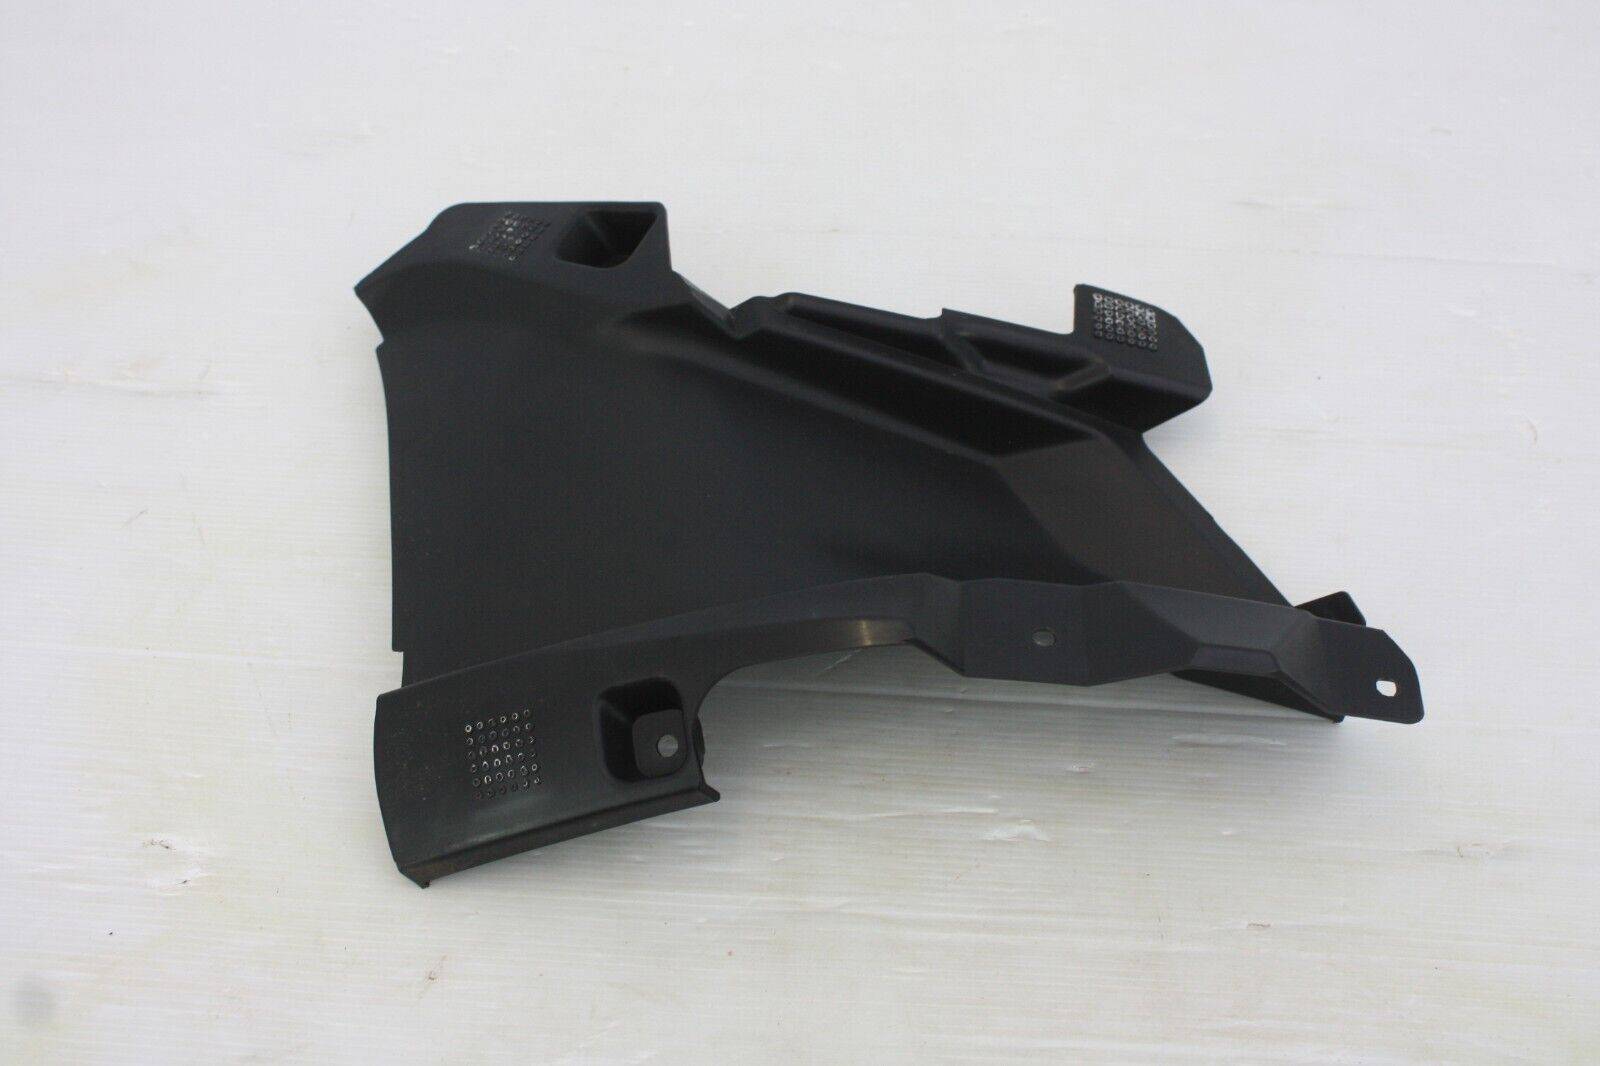 Ford Focus Front Bumper Right Support Bracket 2020 ON NX7B 17E888 A Genuine 175674272574